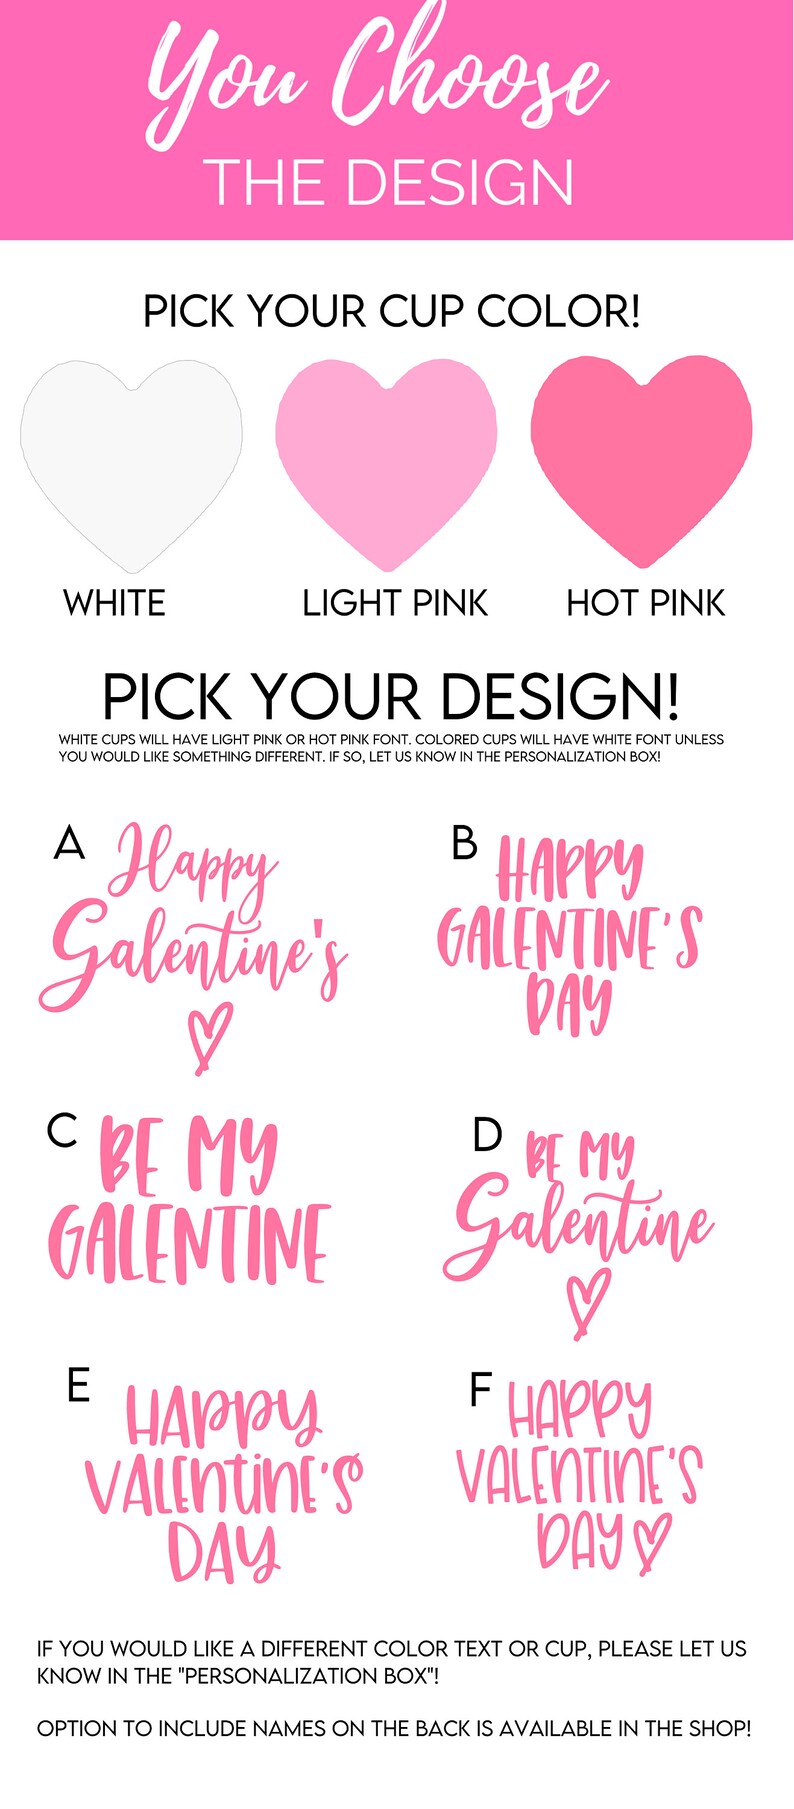 Be My Galentine Cup Valentines Day Favors Galentines Day Cups Galentines Day Favors Be my Galentine Galentines Day Brunch image 2